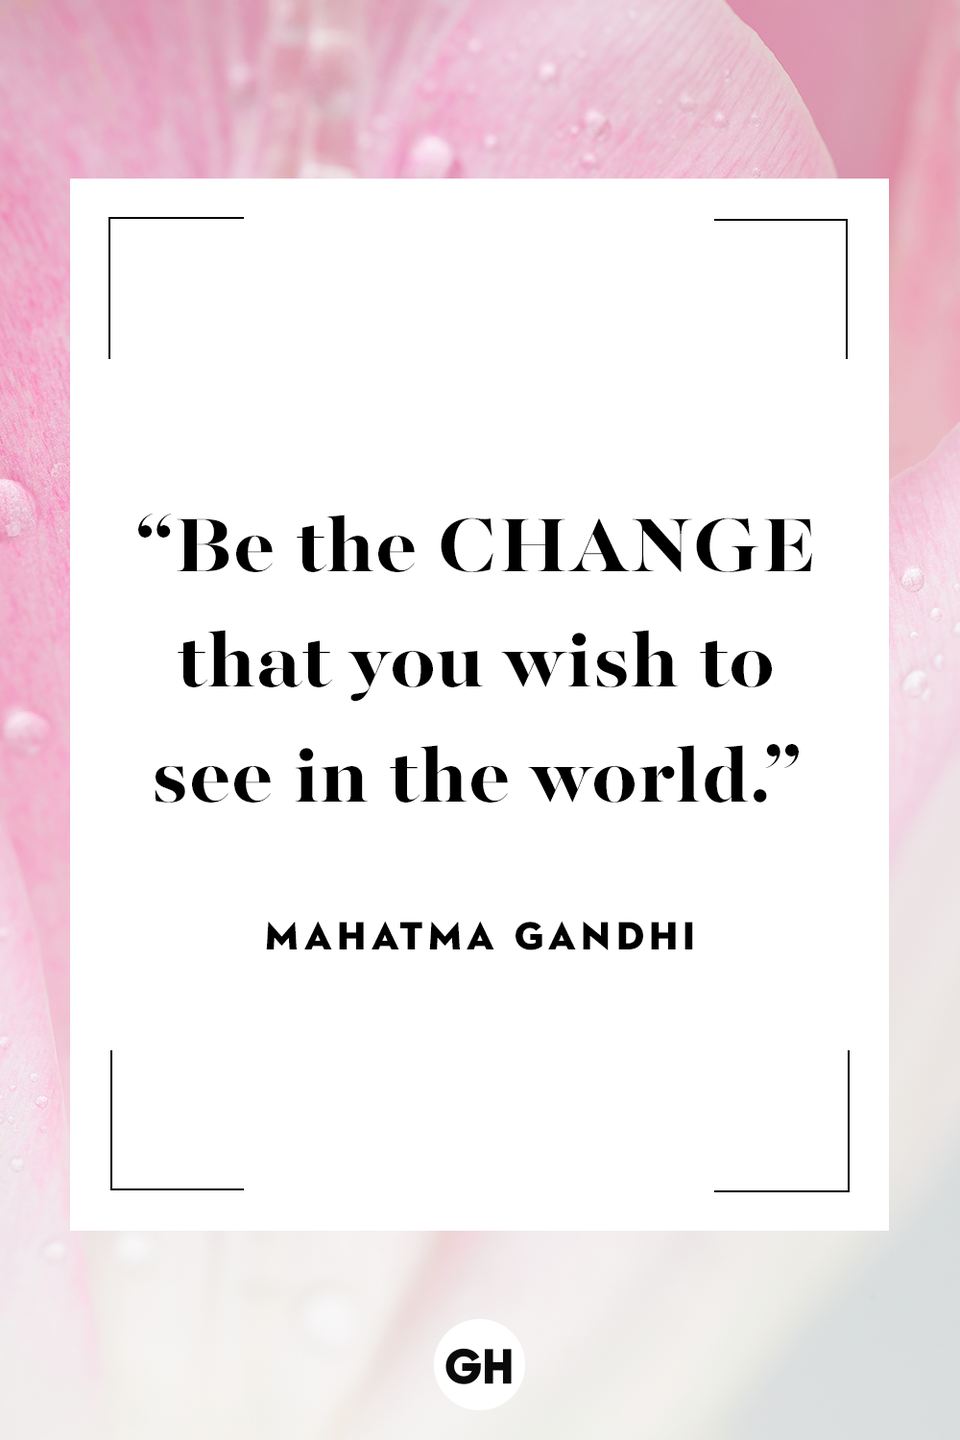 <p>Be the change that you wish to see in the world.</p>